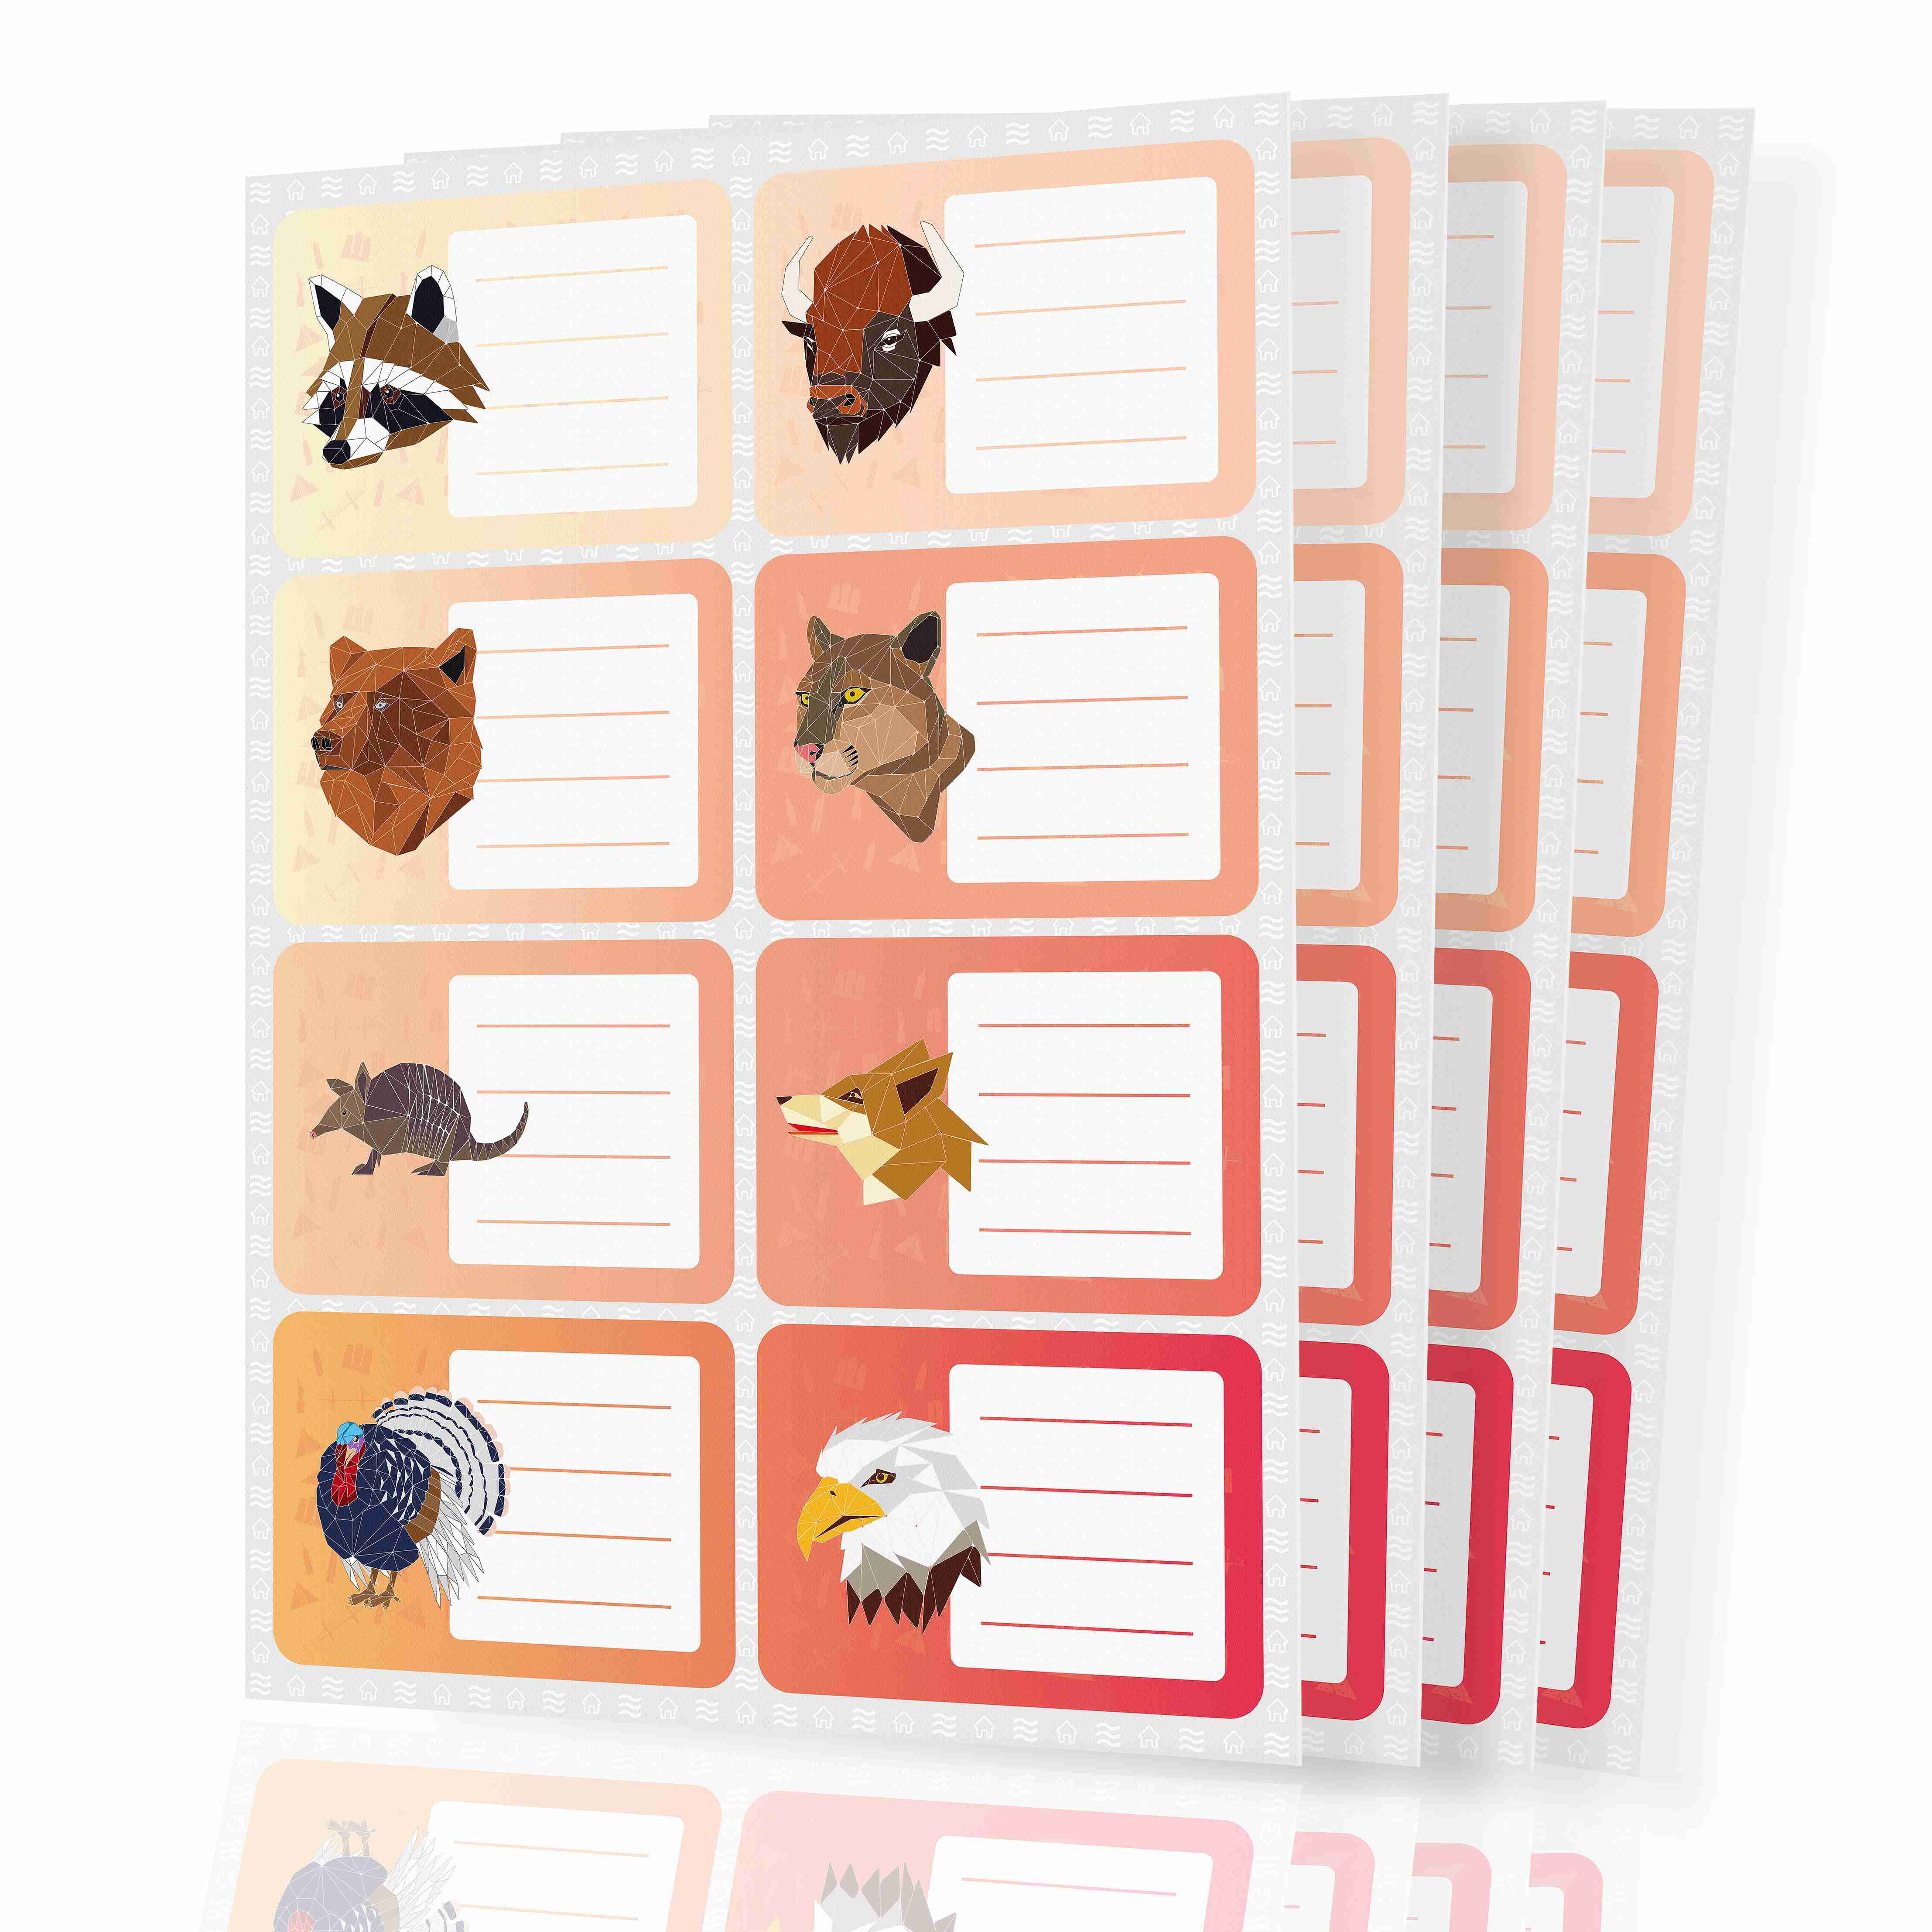 animal-stickers-for-kids-custom-stickers-name-tags with cash back rebate